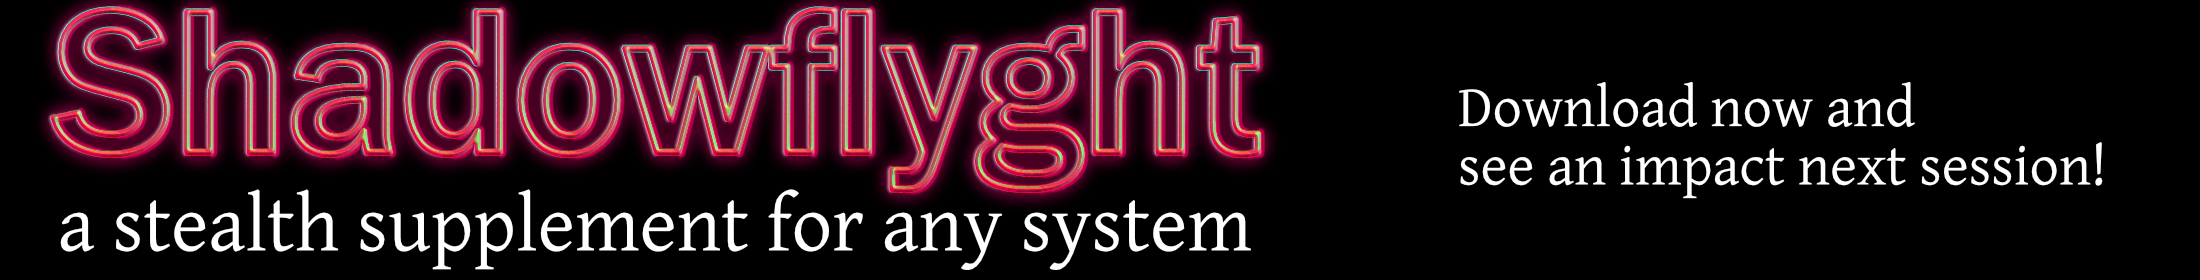 Shadowflyght: A Stealth Supplement for Any System